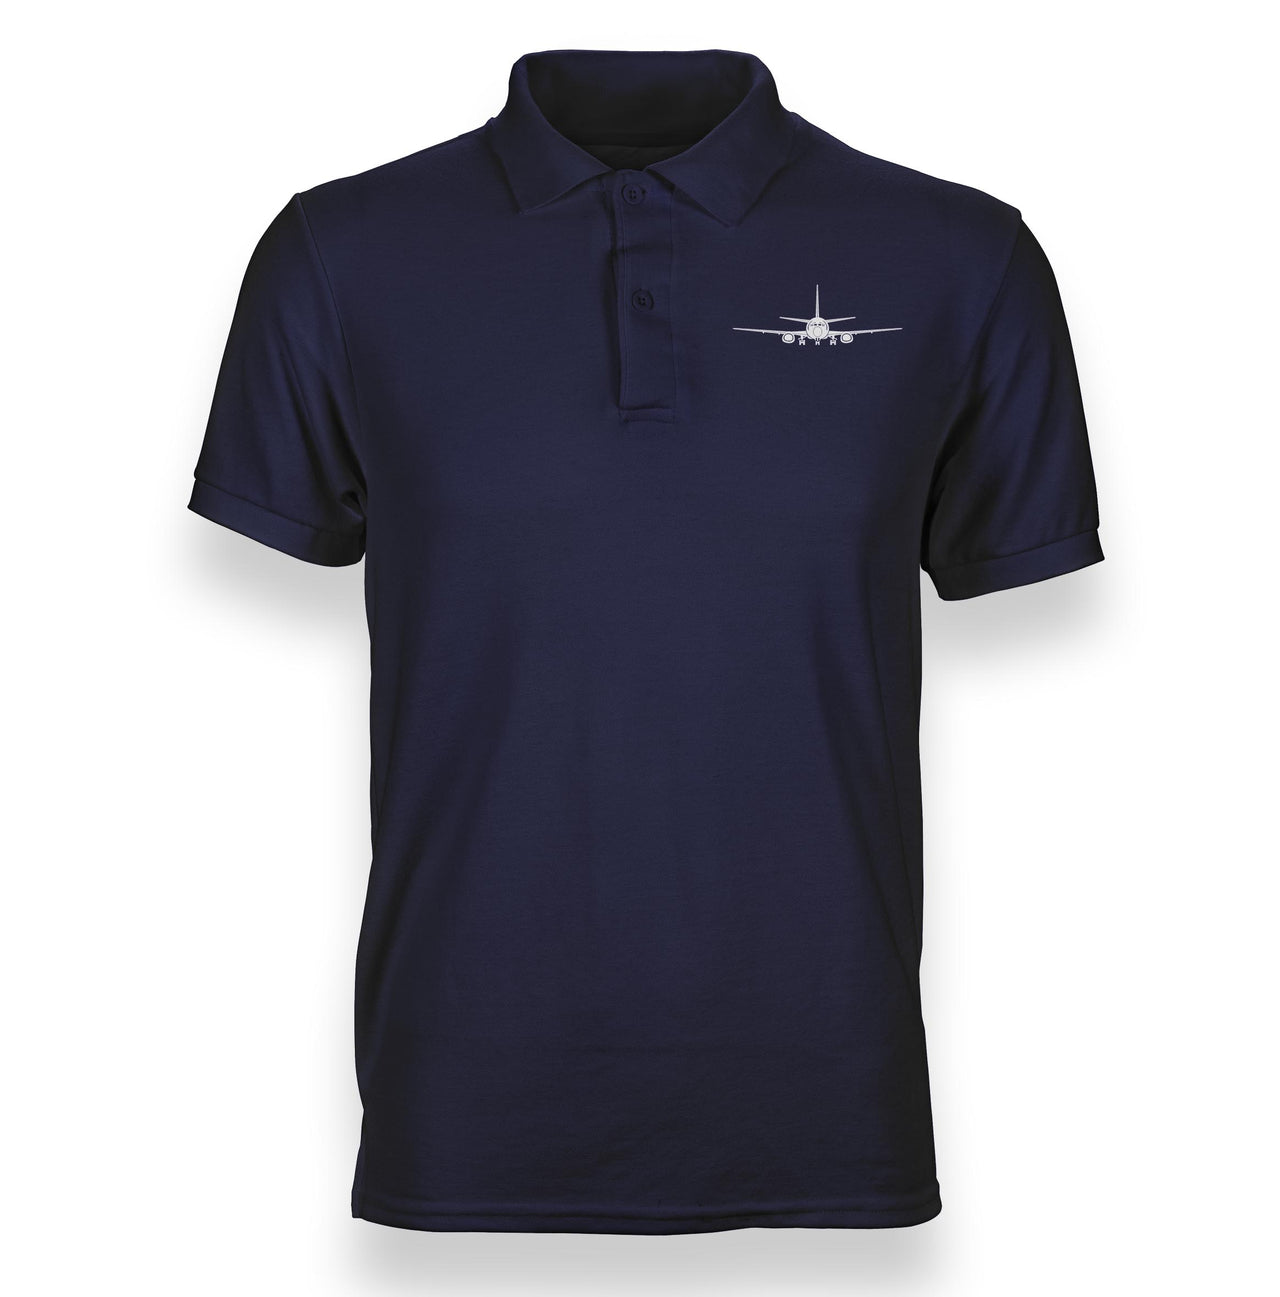 Boeing 737 Silhouette Designed Polo T-Shirts